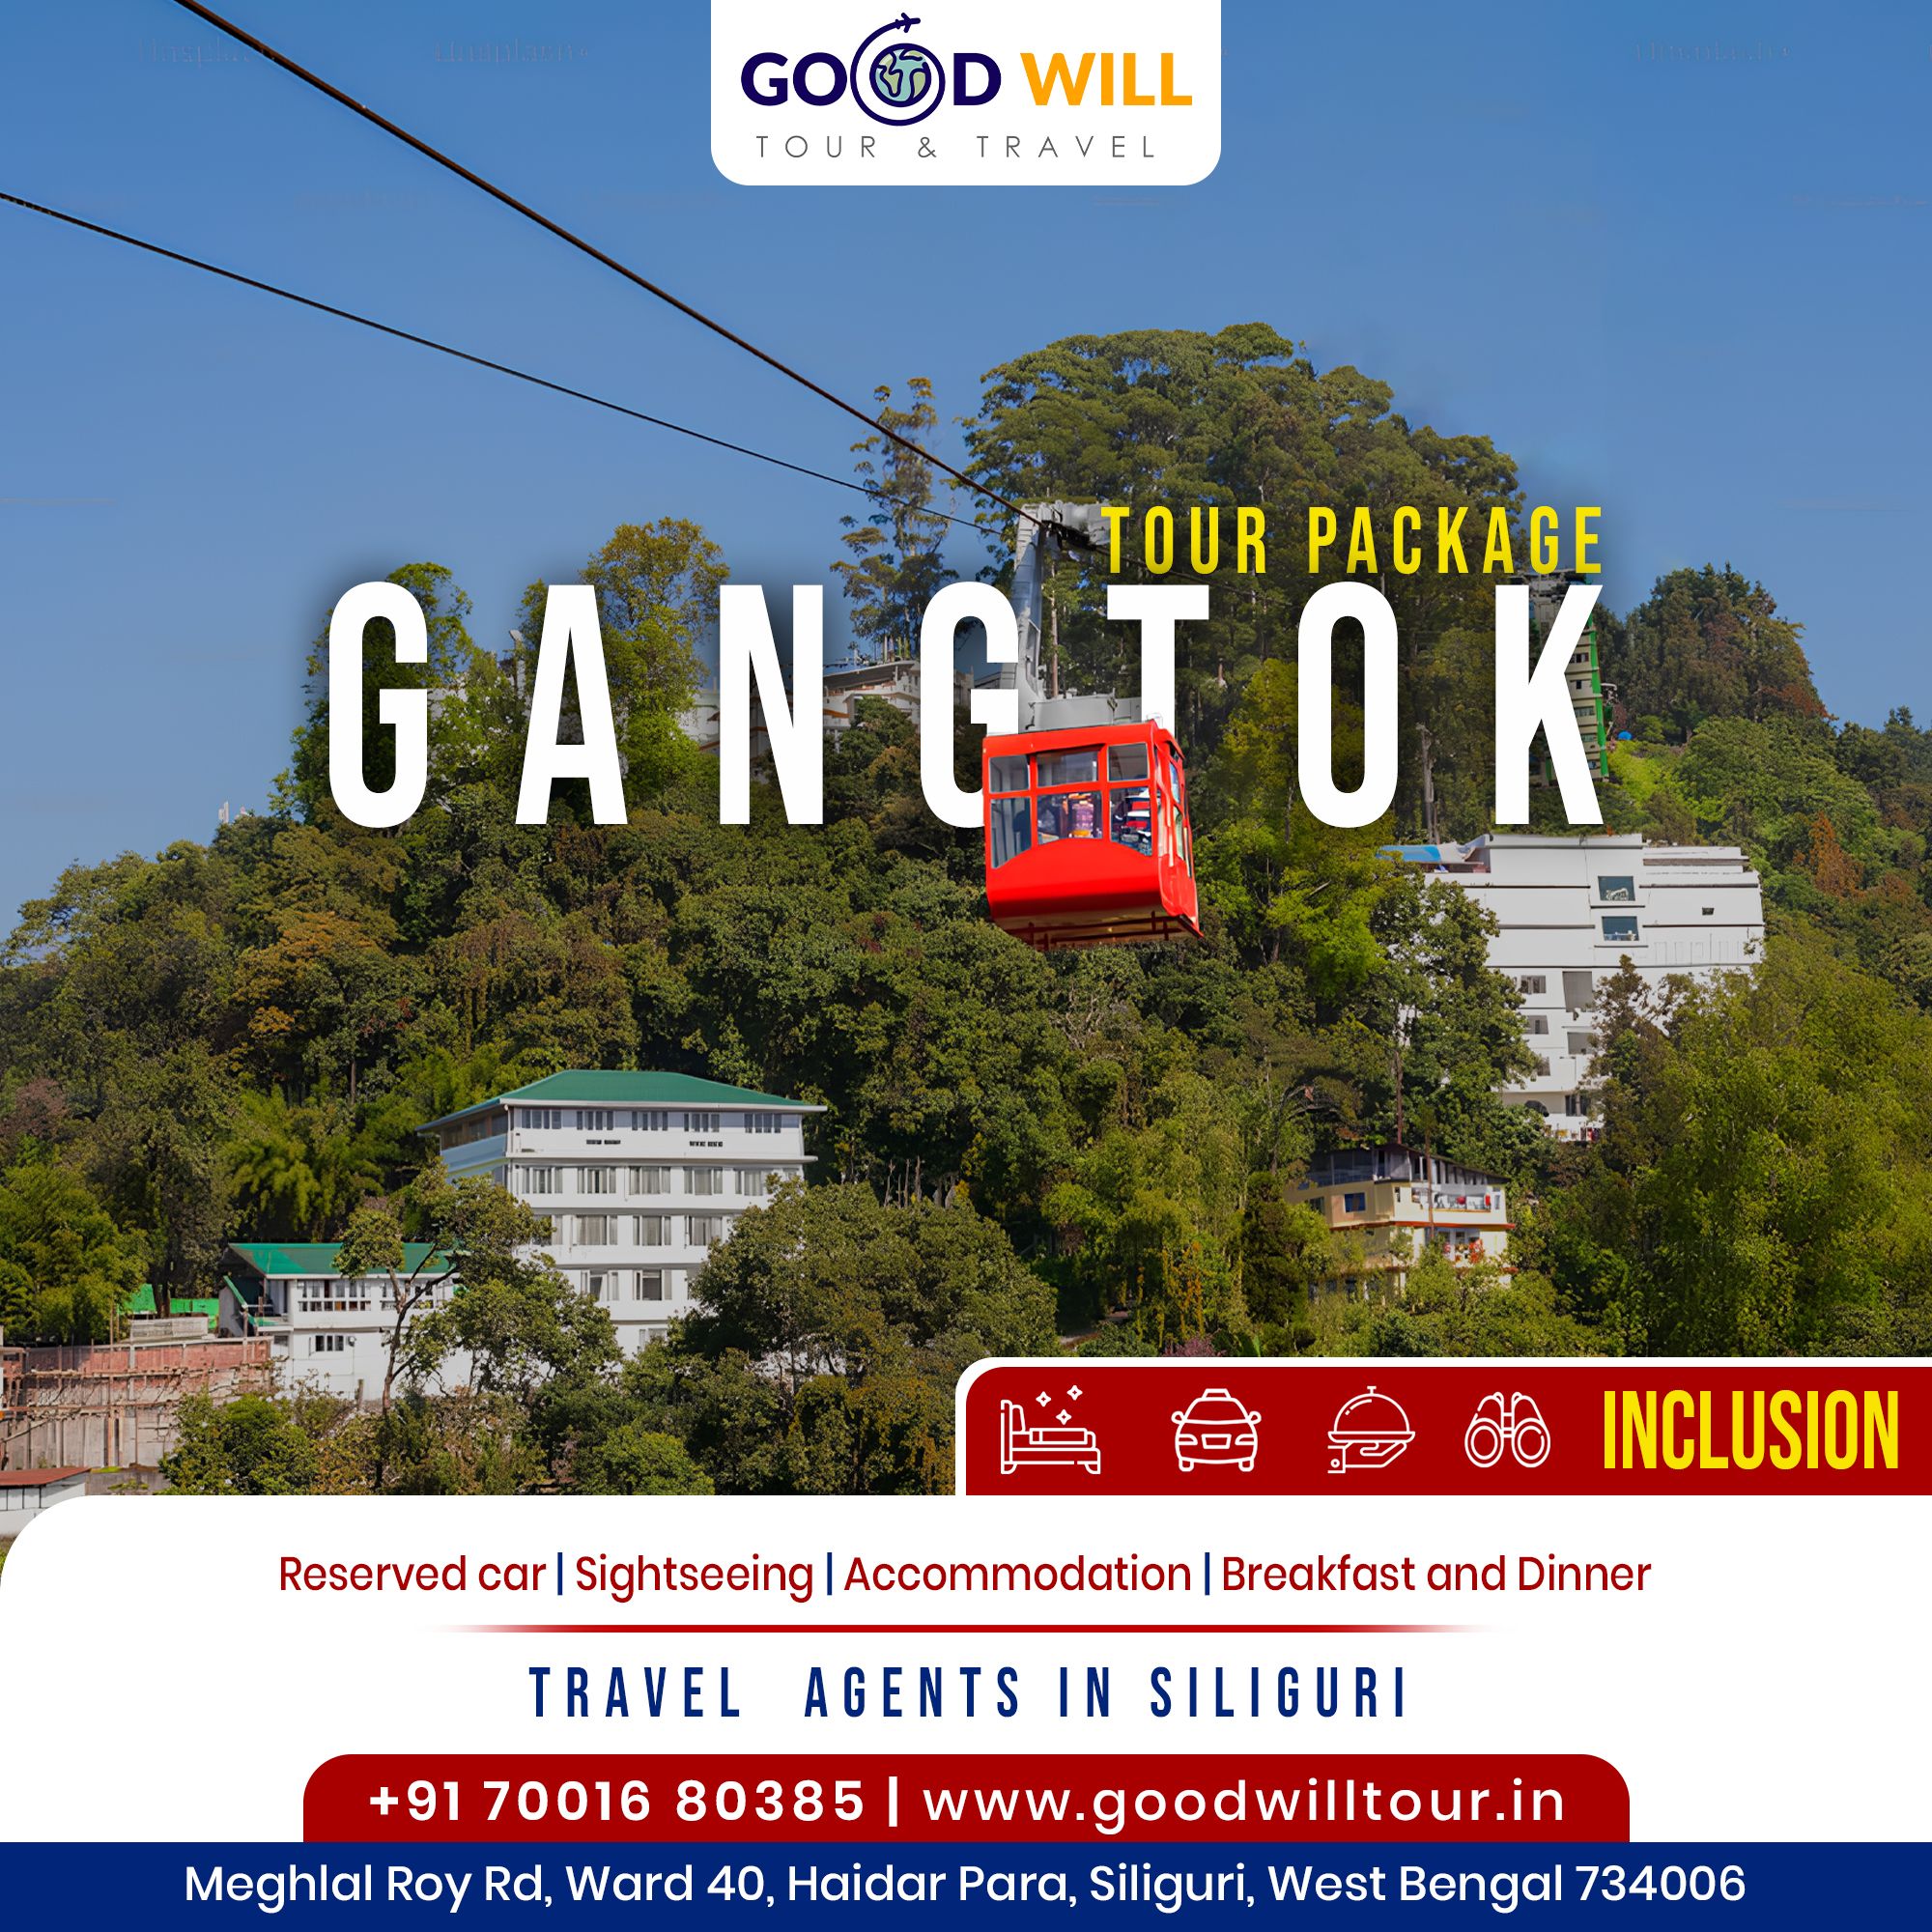 tour operators in Siliguri | Goodwill Tour and Travel 